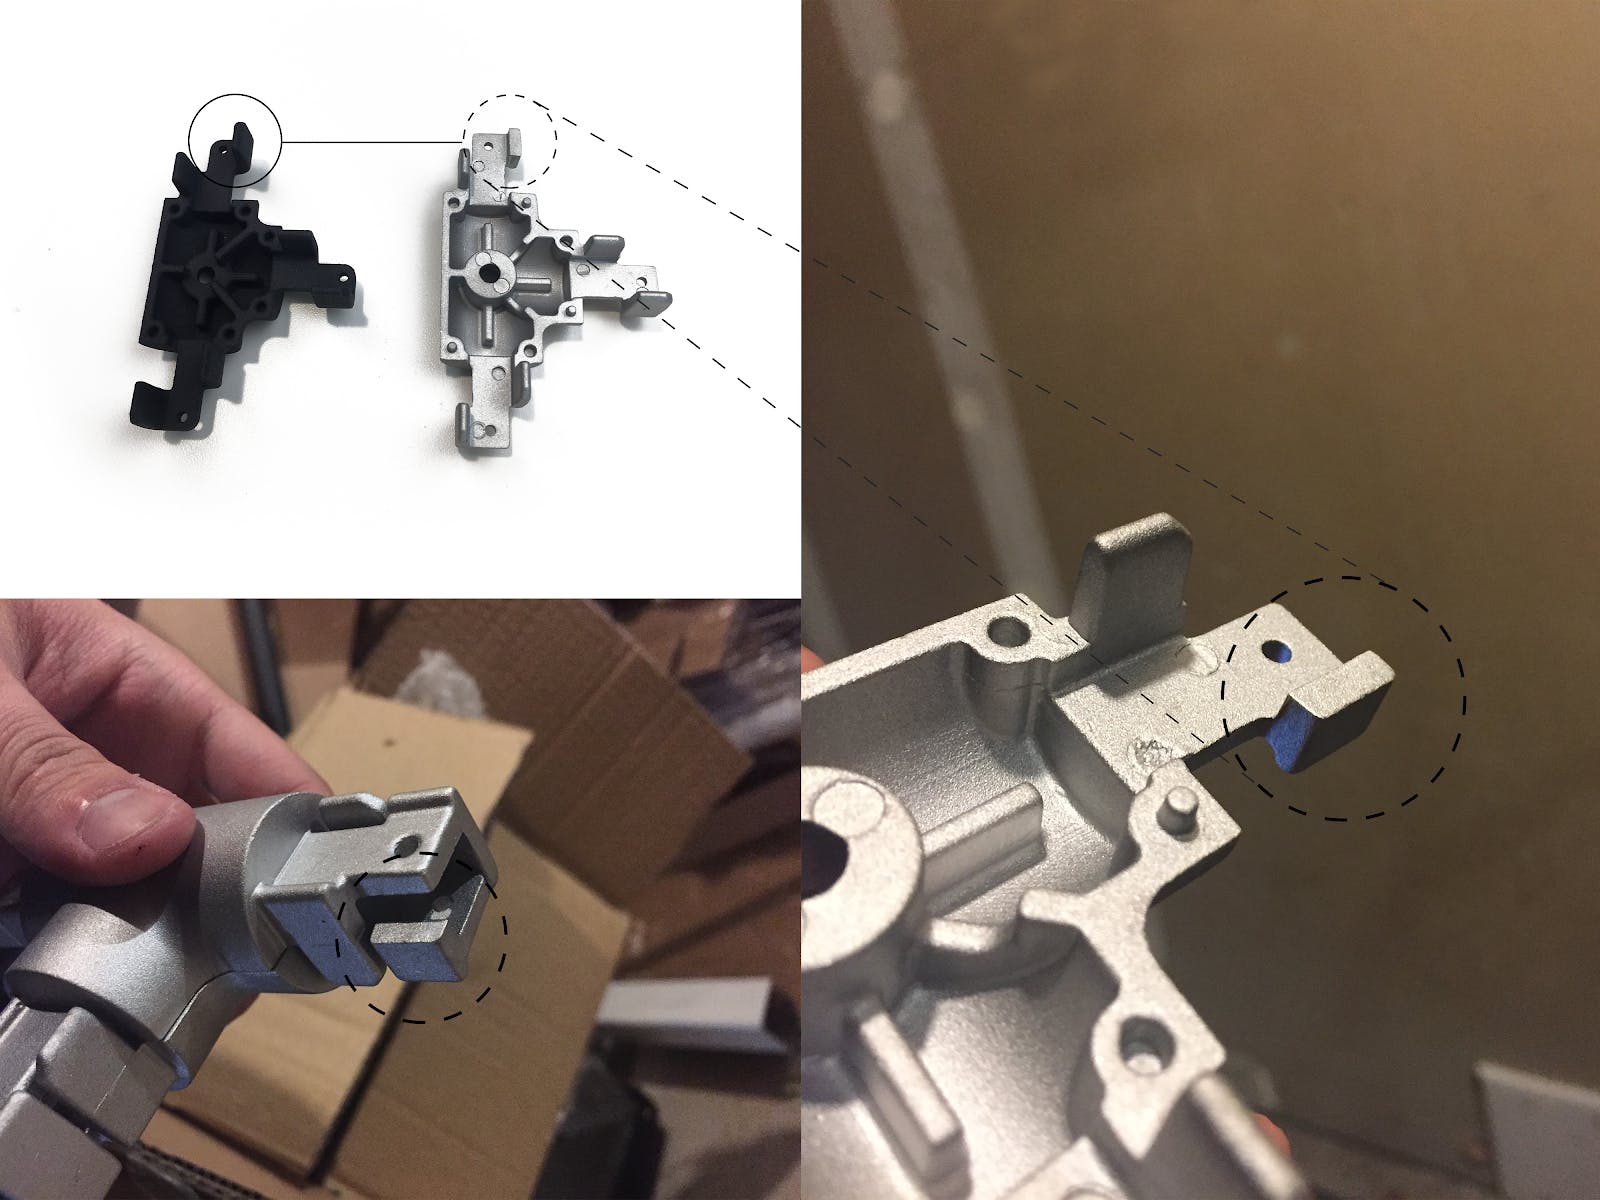 Details of missing geometry from our first production parts. Failure to handle quality check in a more direct manner resulted in more time and money wasted.